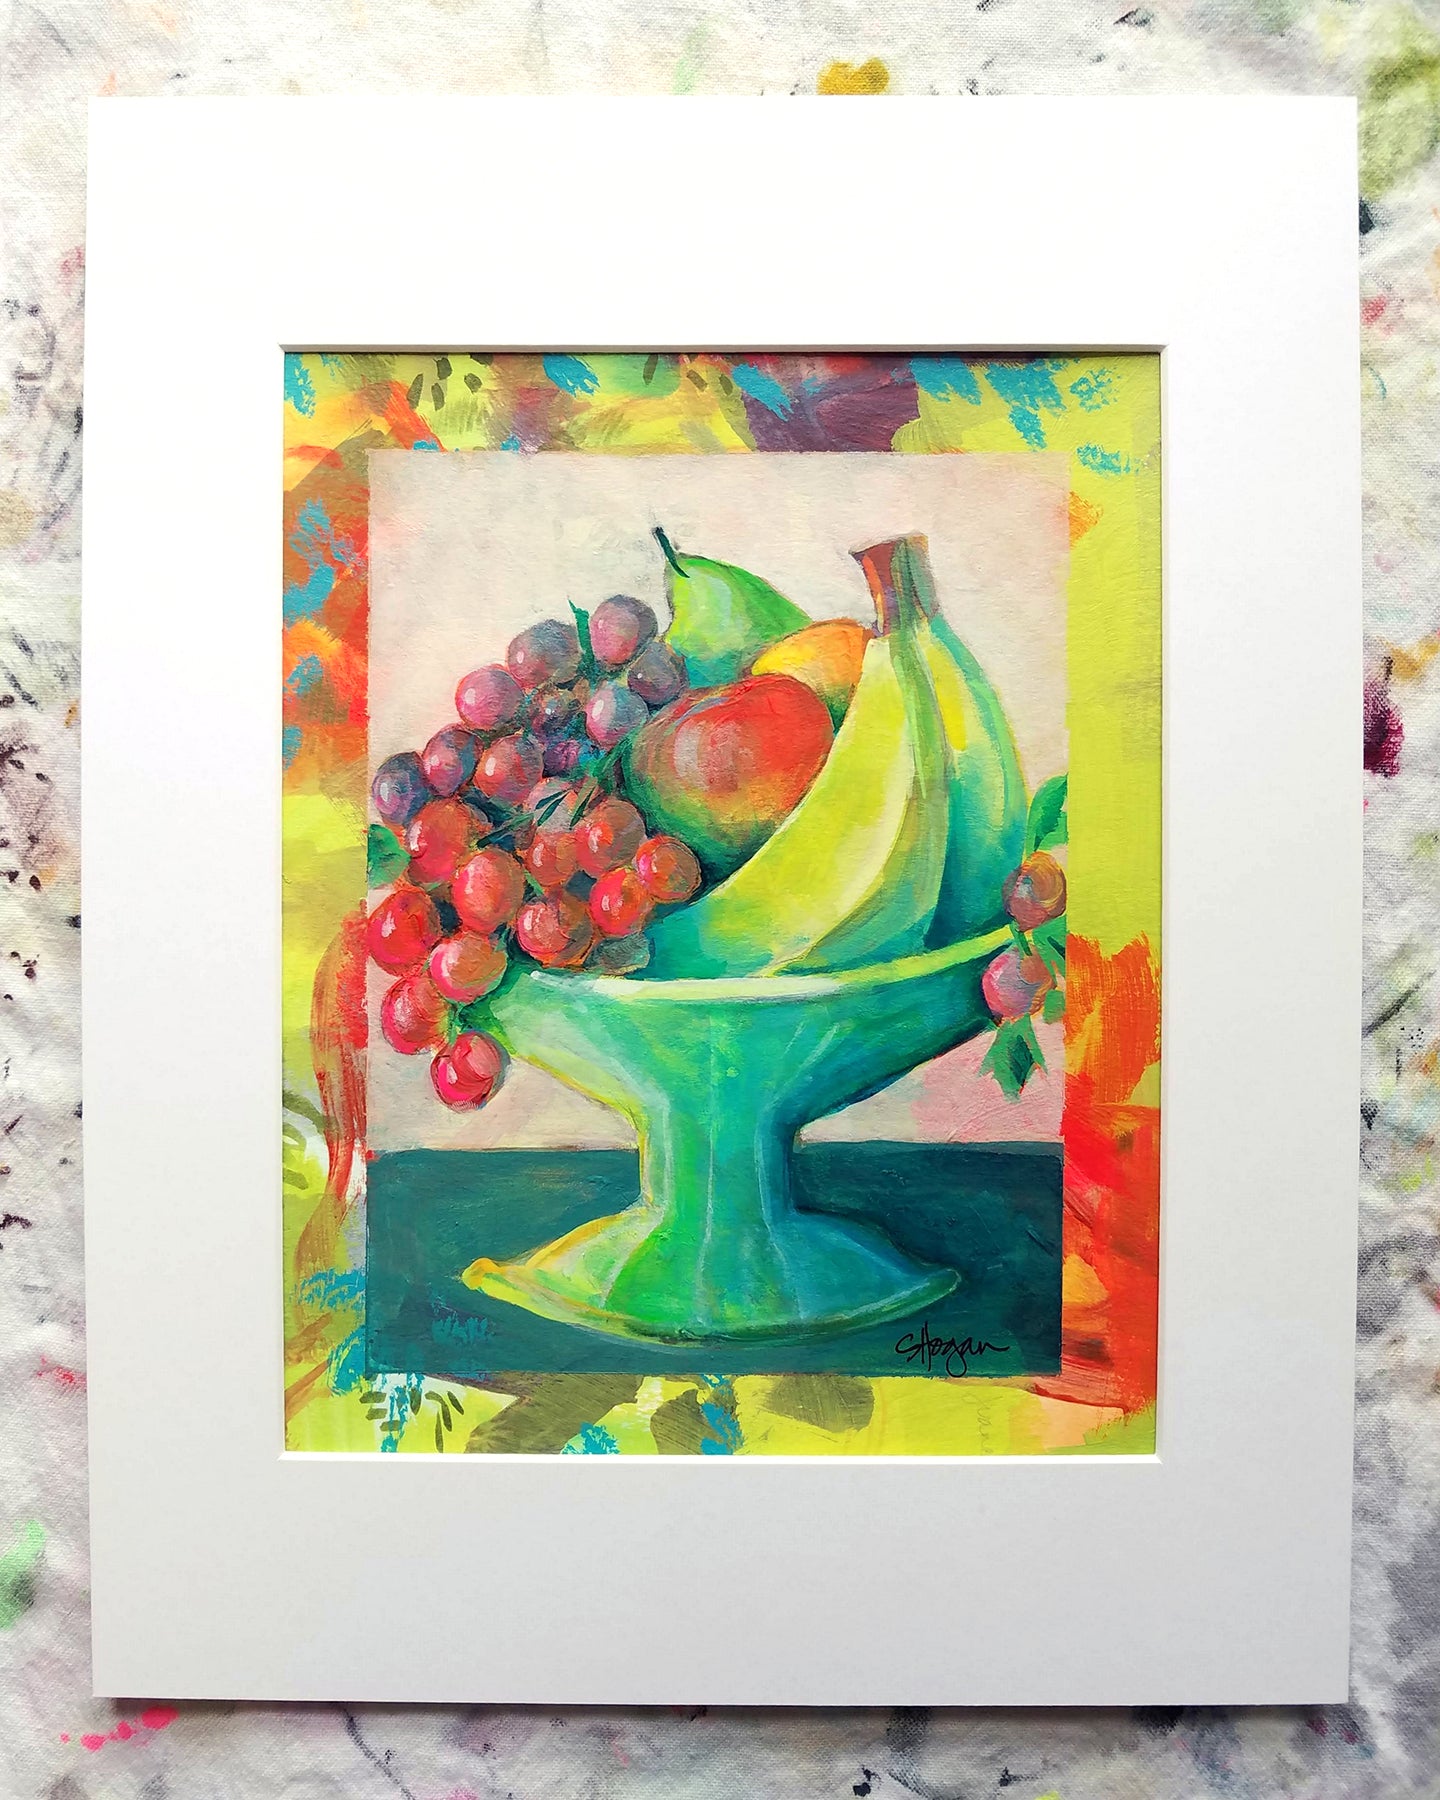 Fresh Fruit - Little Comforts Collection, 2019 by Michigan artist Steph Joy Hogan.  Size: 10" x 8", Matted 11" x 14"  Media: Acrylic, Ink